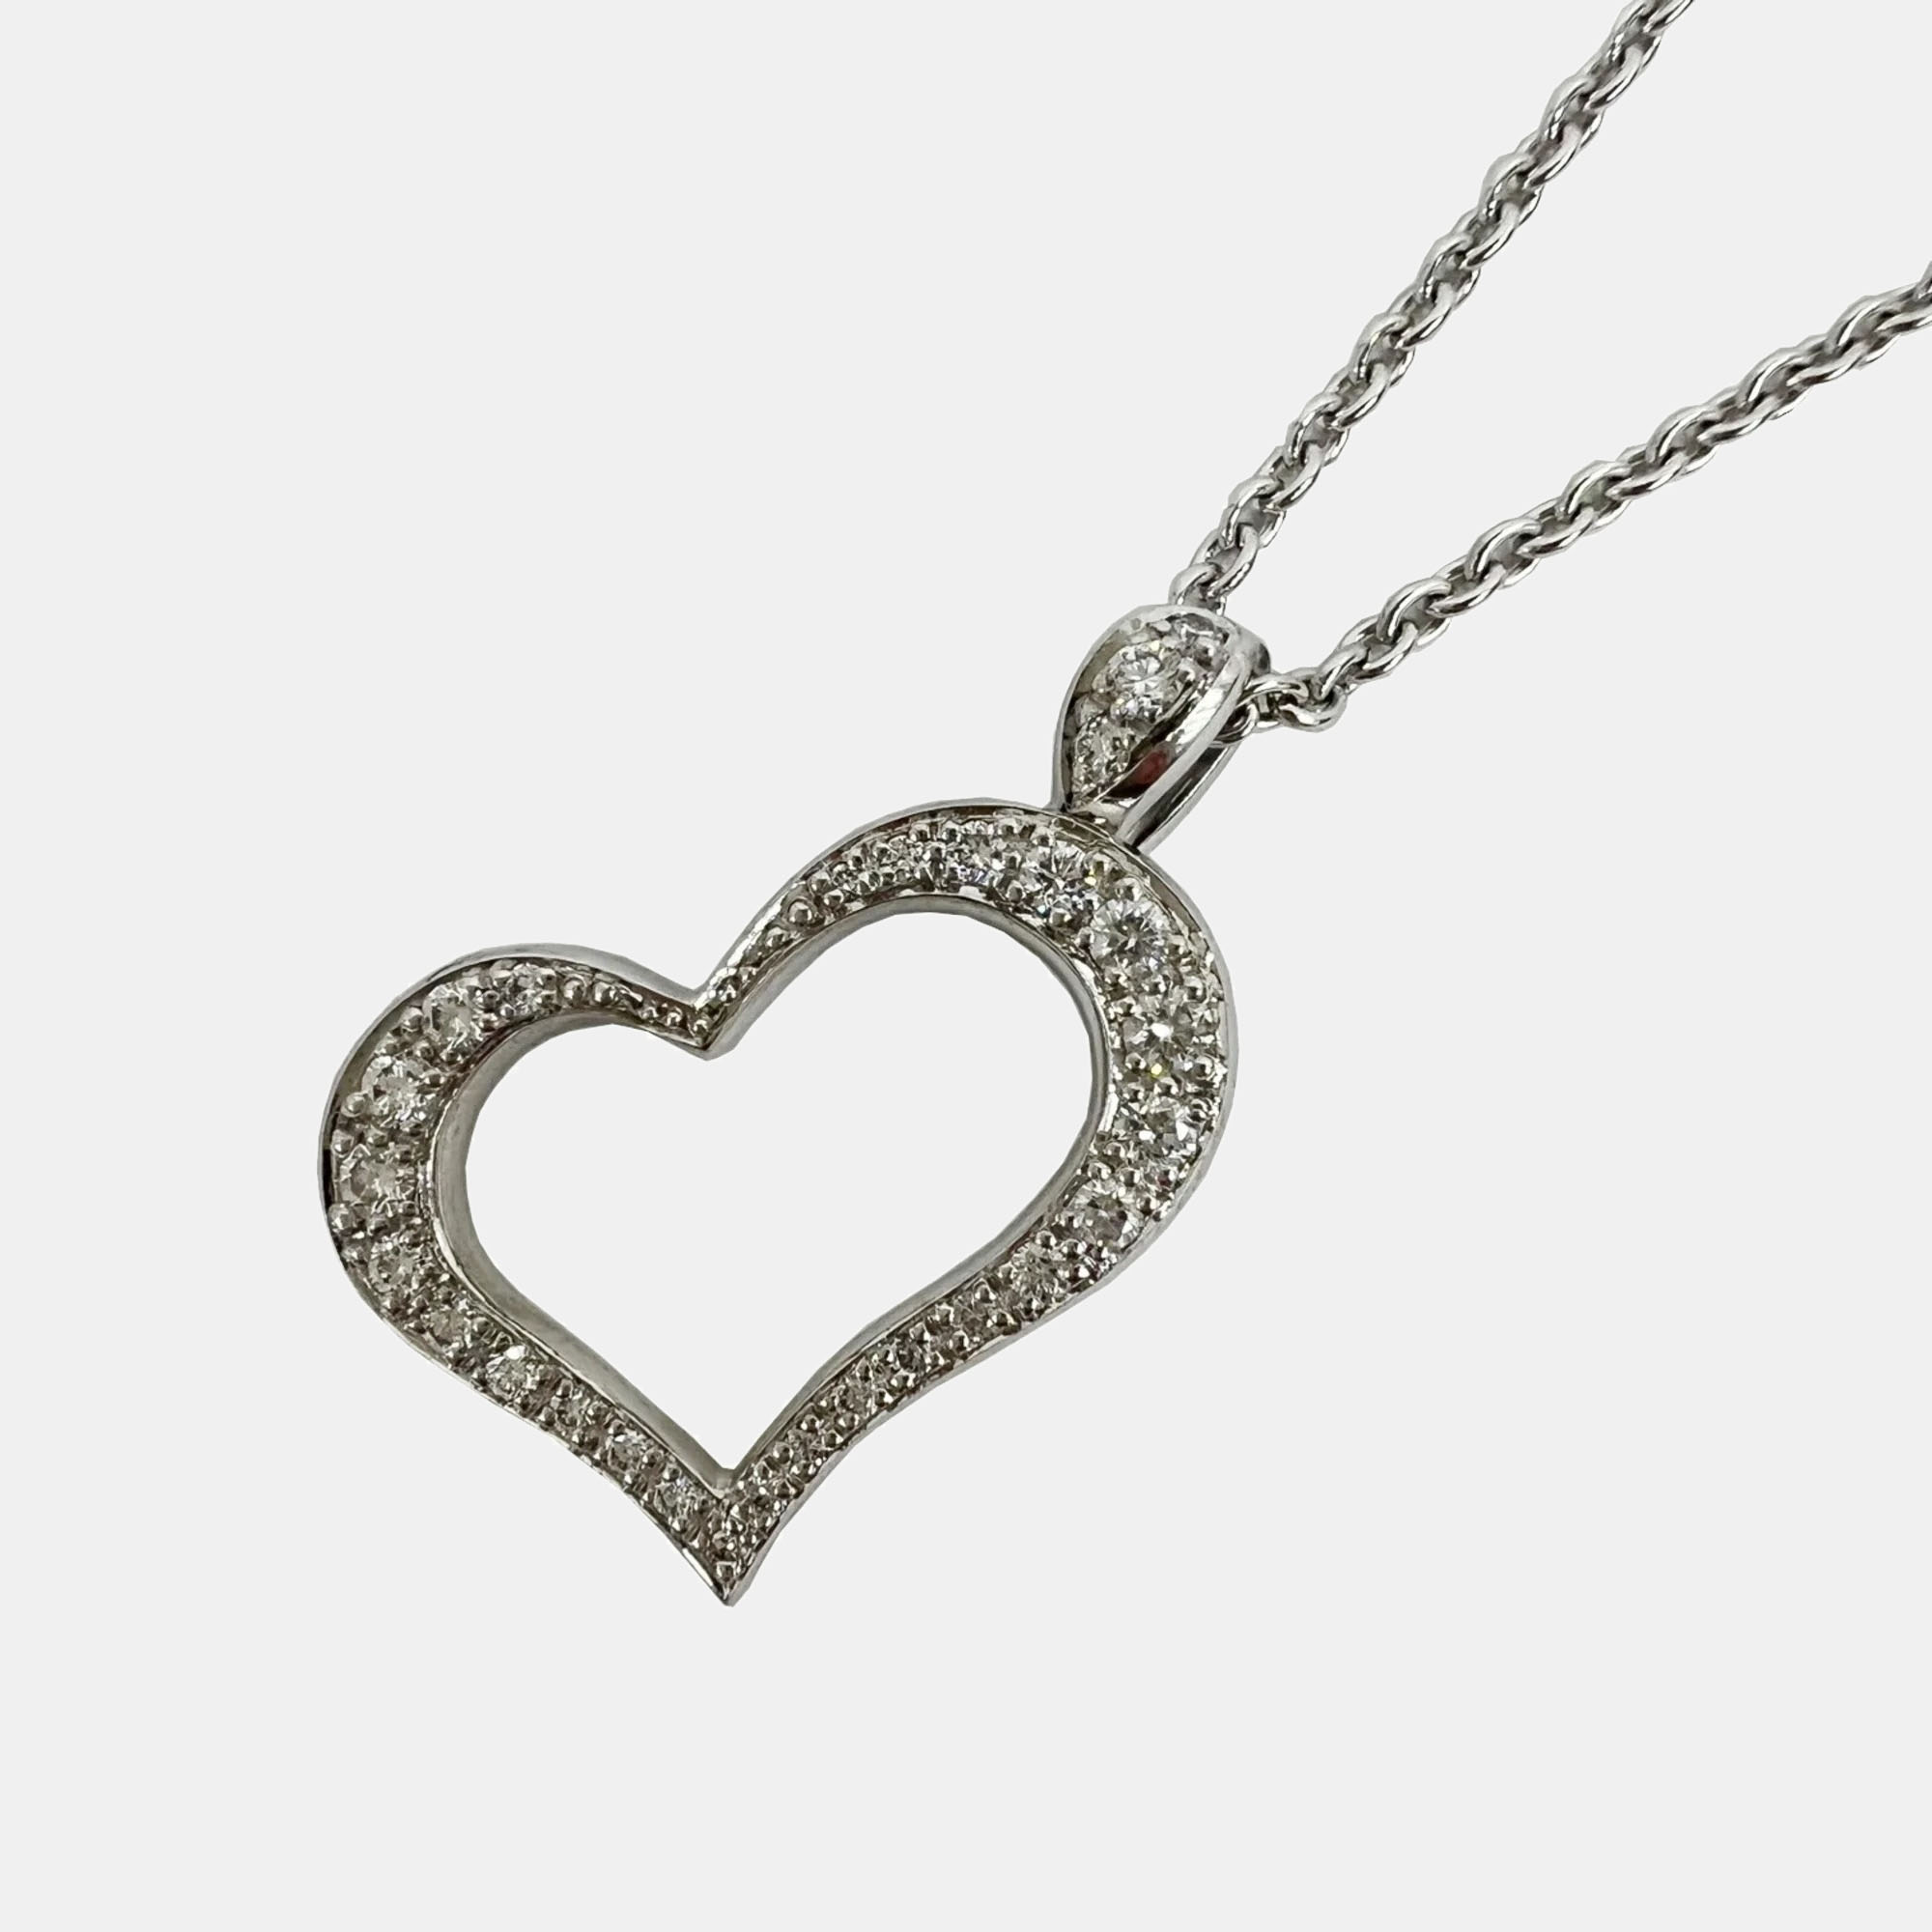 piaget 18k white gold and diamond heart pendant necklace